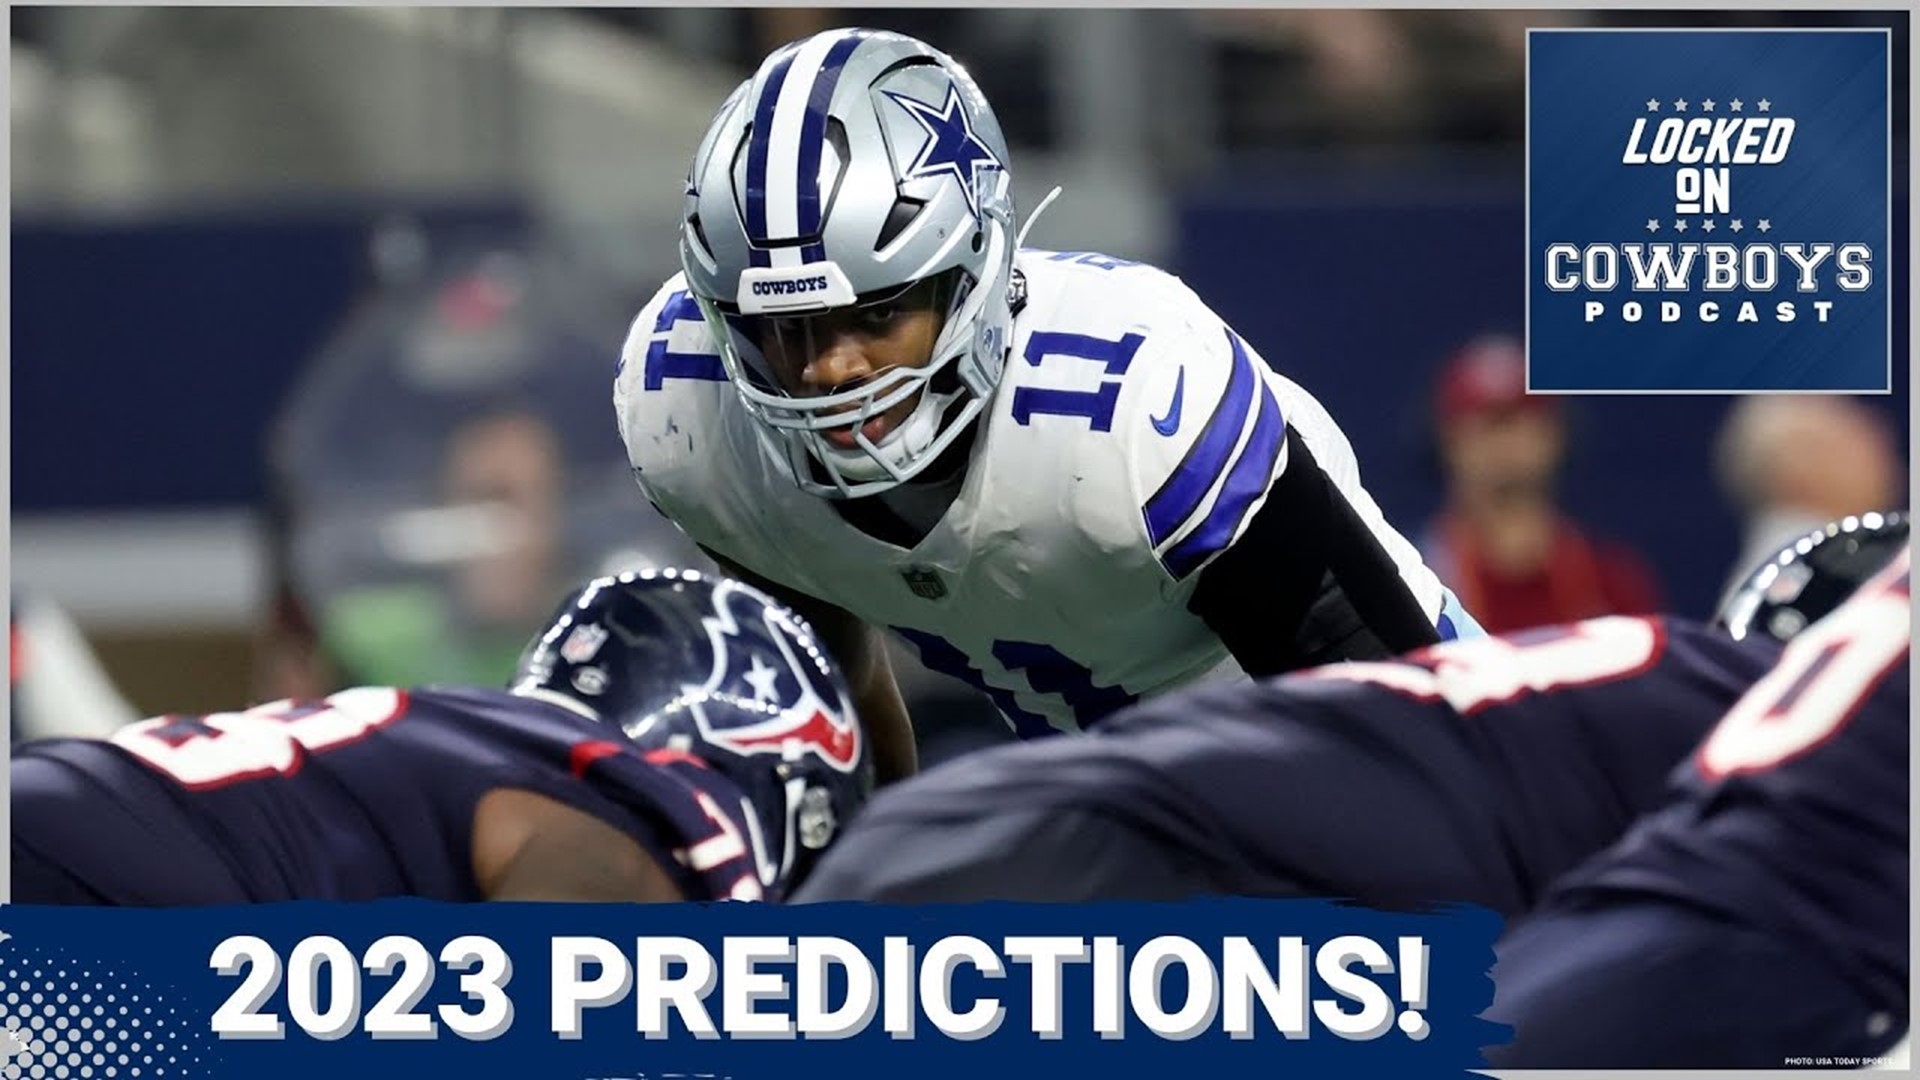 FanDuel set the O/U on wins for the Dallas Cowboys at 9.5 for the 2023 season. Will they go over that total again and win double-digit games for the third straight